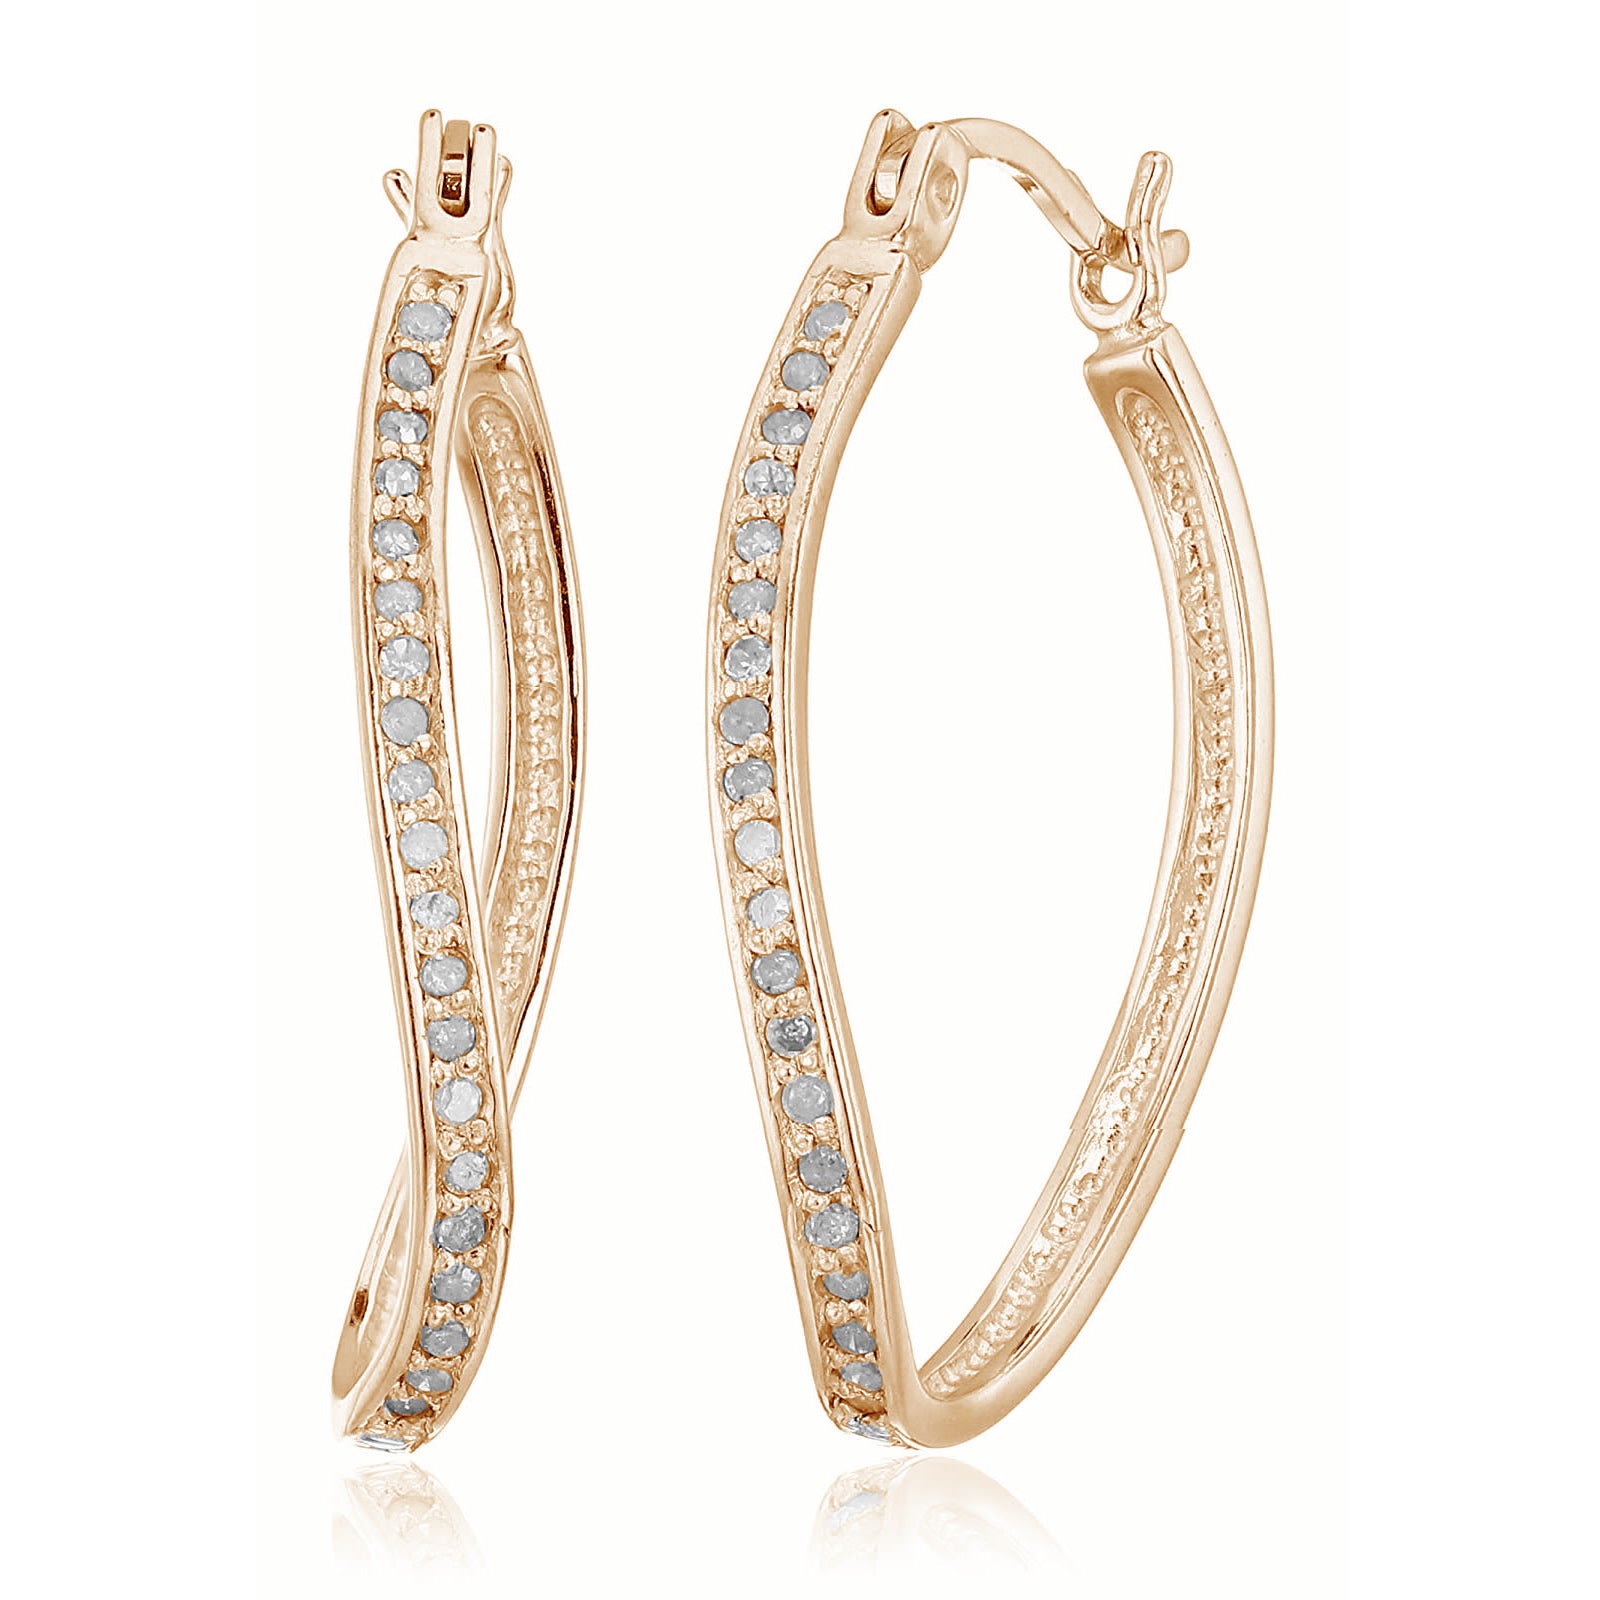 1/4 cttw Diamond Hoop Earrings Rose Gold Plated over .925 Sterling Silver 1 Inch